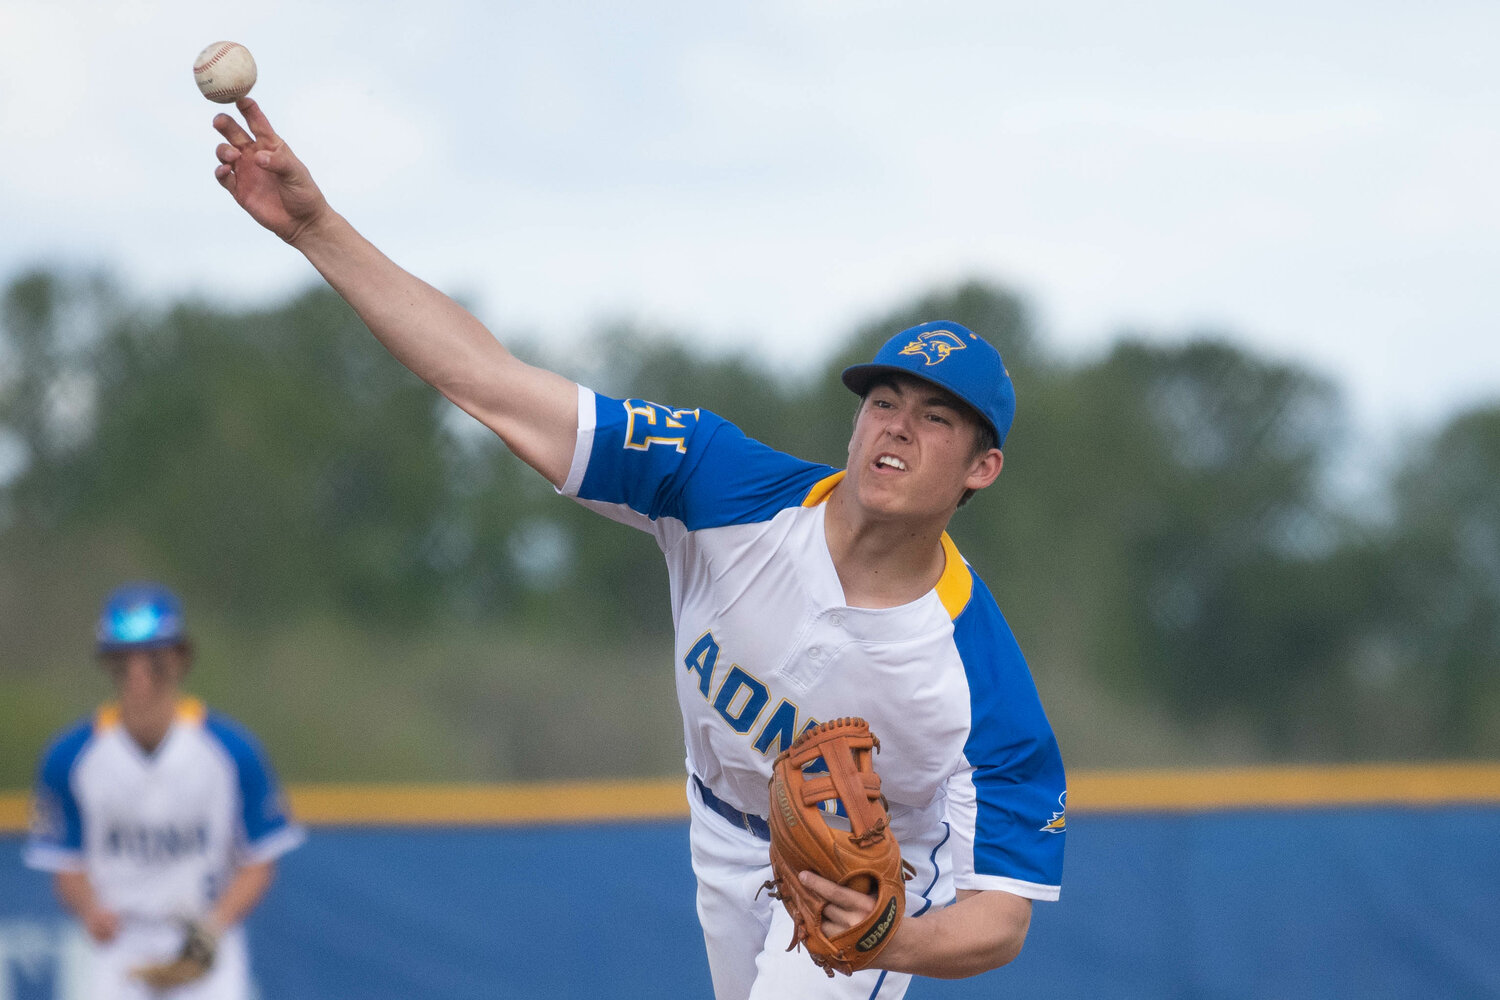 Asher Guerrero throws a pitch during Adna's 15-5 loss to Toutle Lake in the 2B District 4 tournament semifinals, in Adna on May 9.